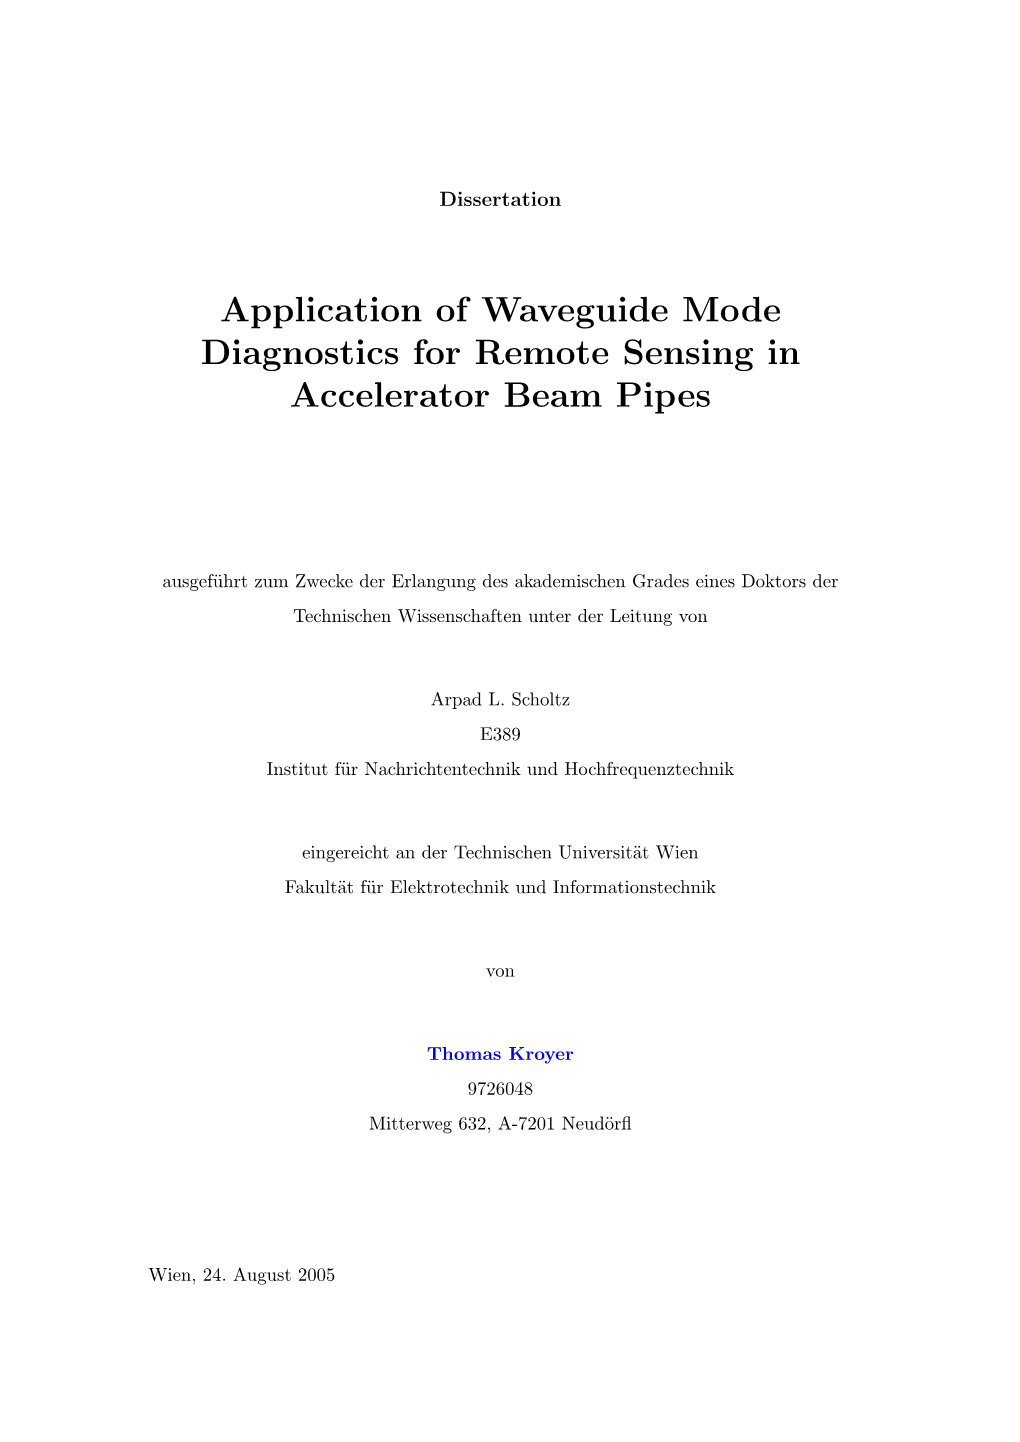 Application of Waveguide Mode Diagnostics for Remote Sensing in Accelerator Beam Pipes